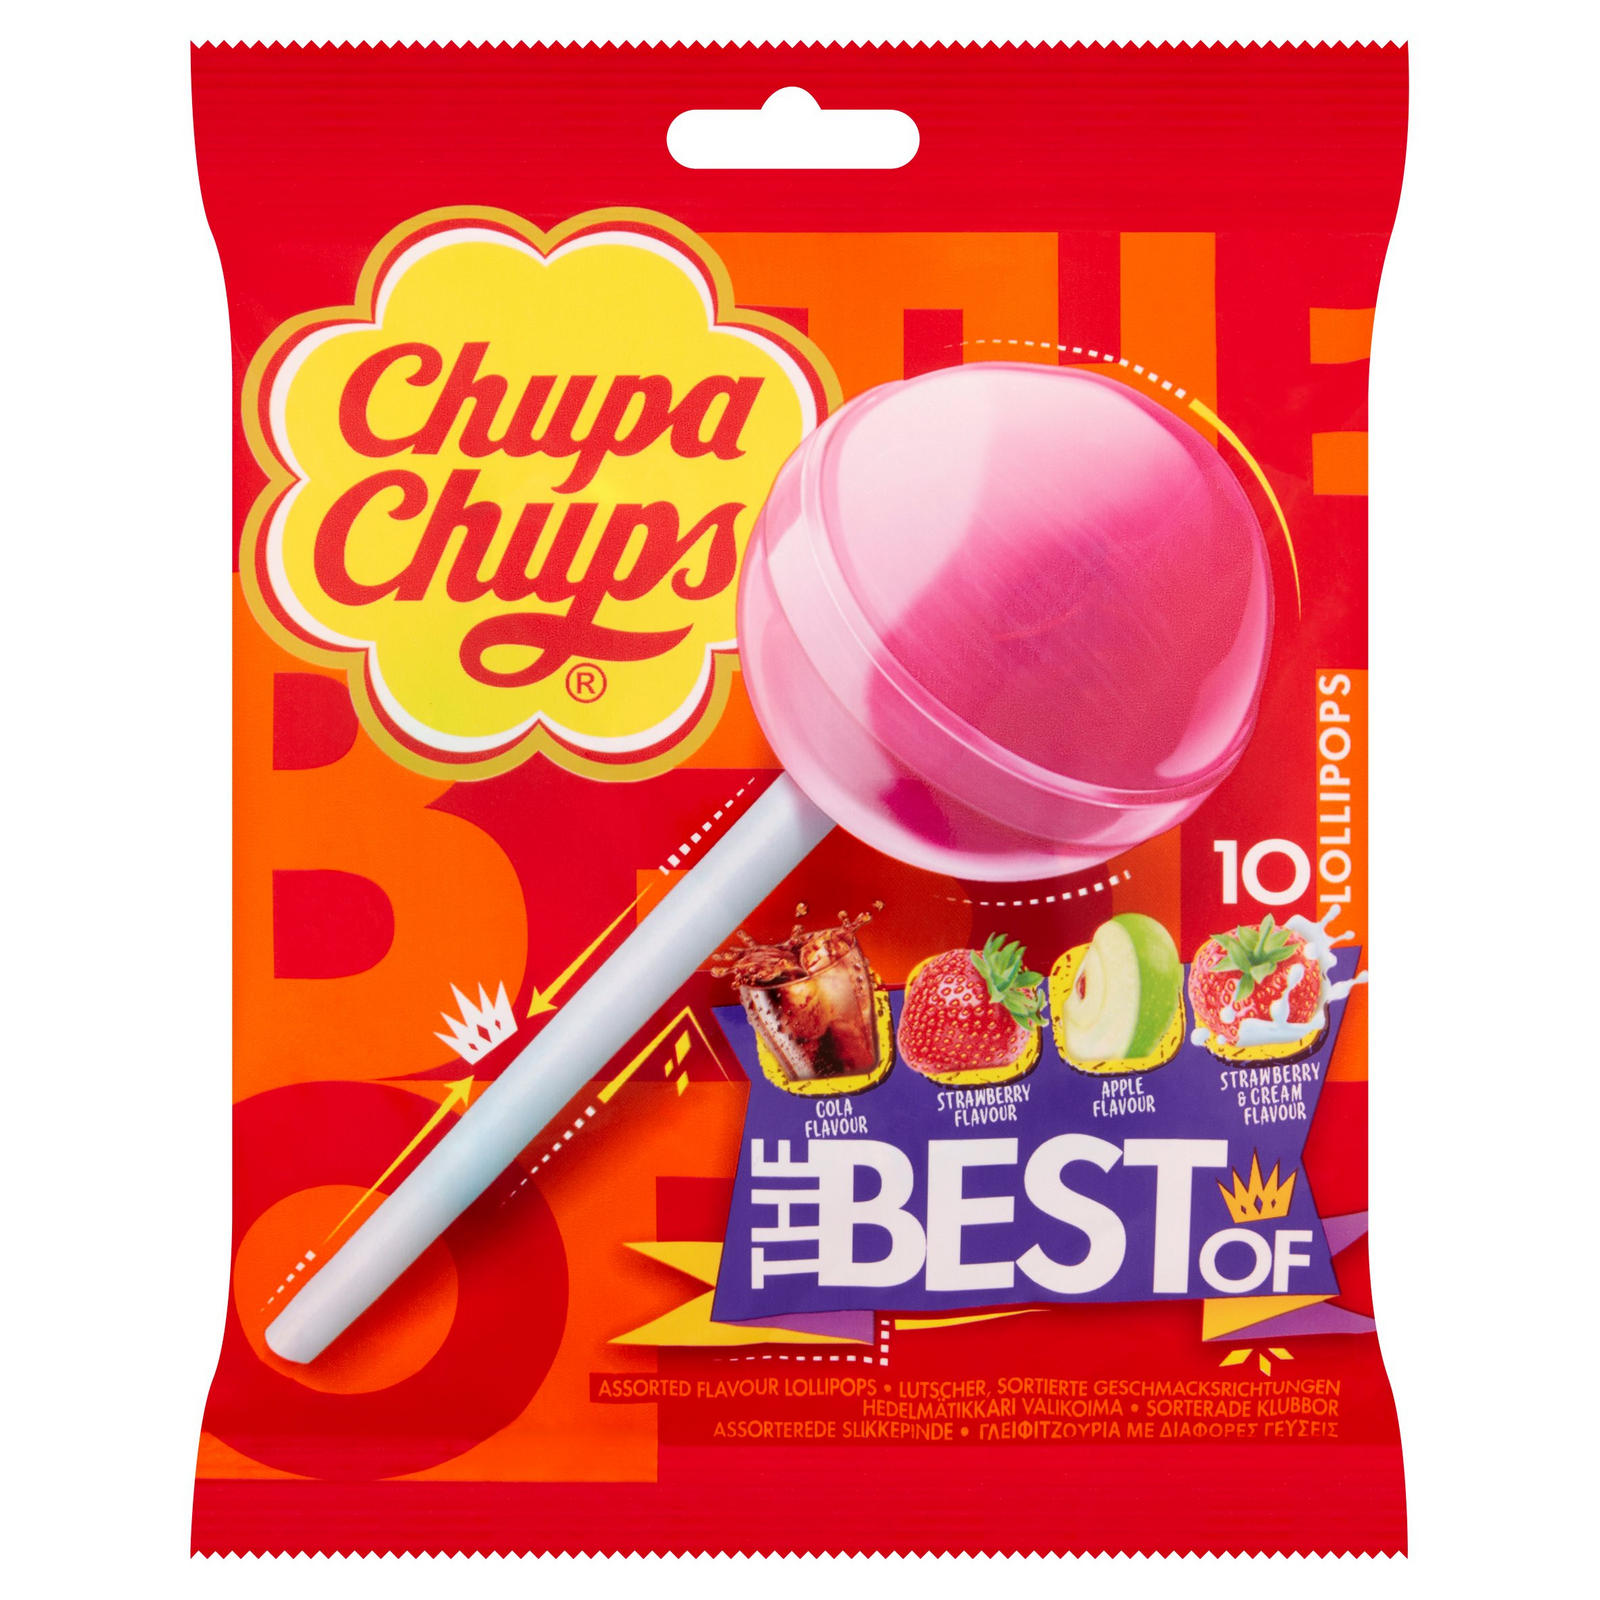 How To Open Chupa Chups Easily Chupa Chups The Best of 10 Assorted Flavour Lollipops 120g | Sweets | Iceland Foods